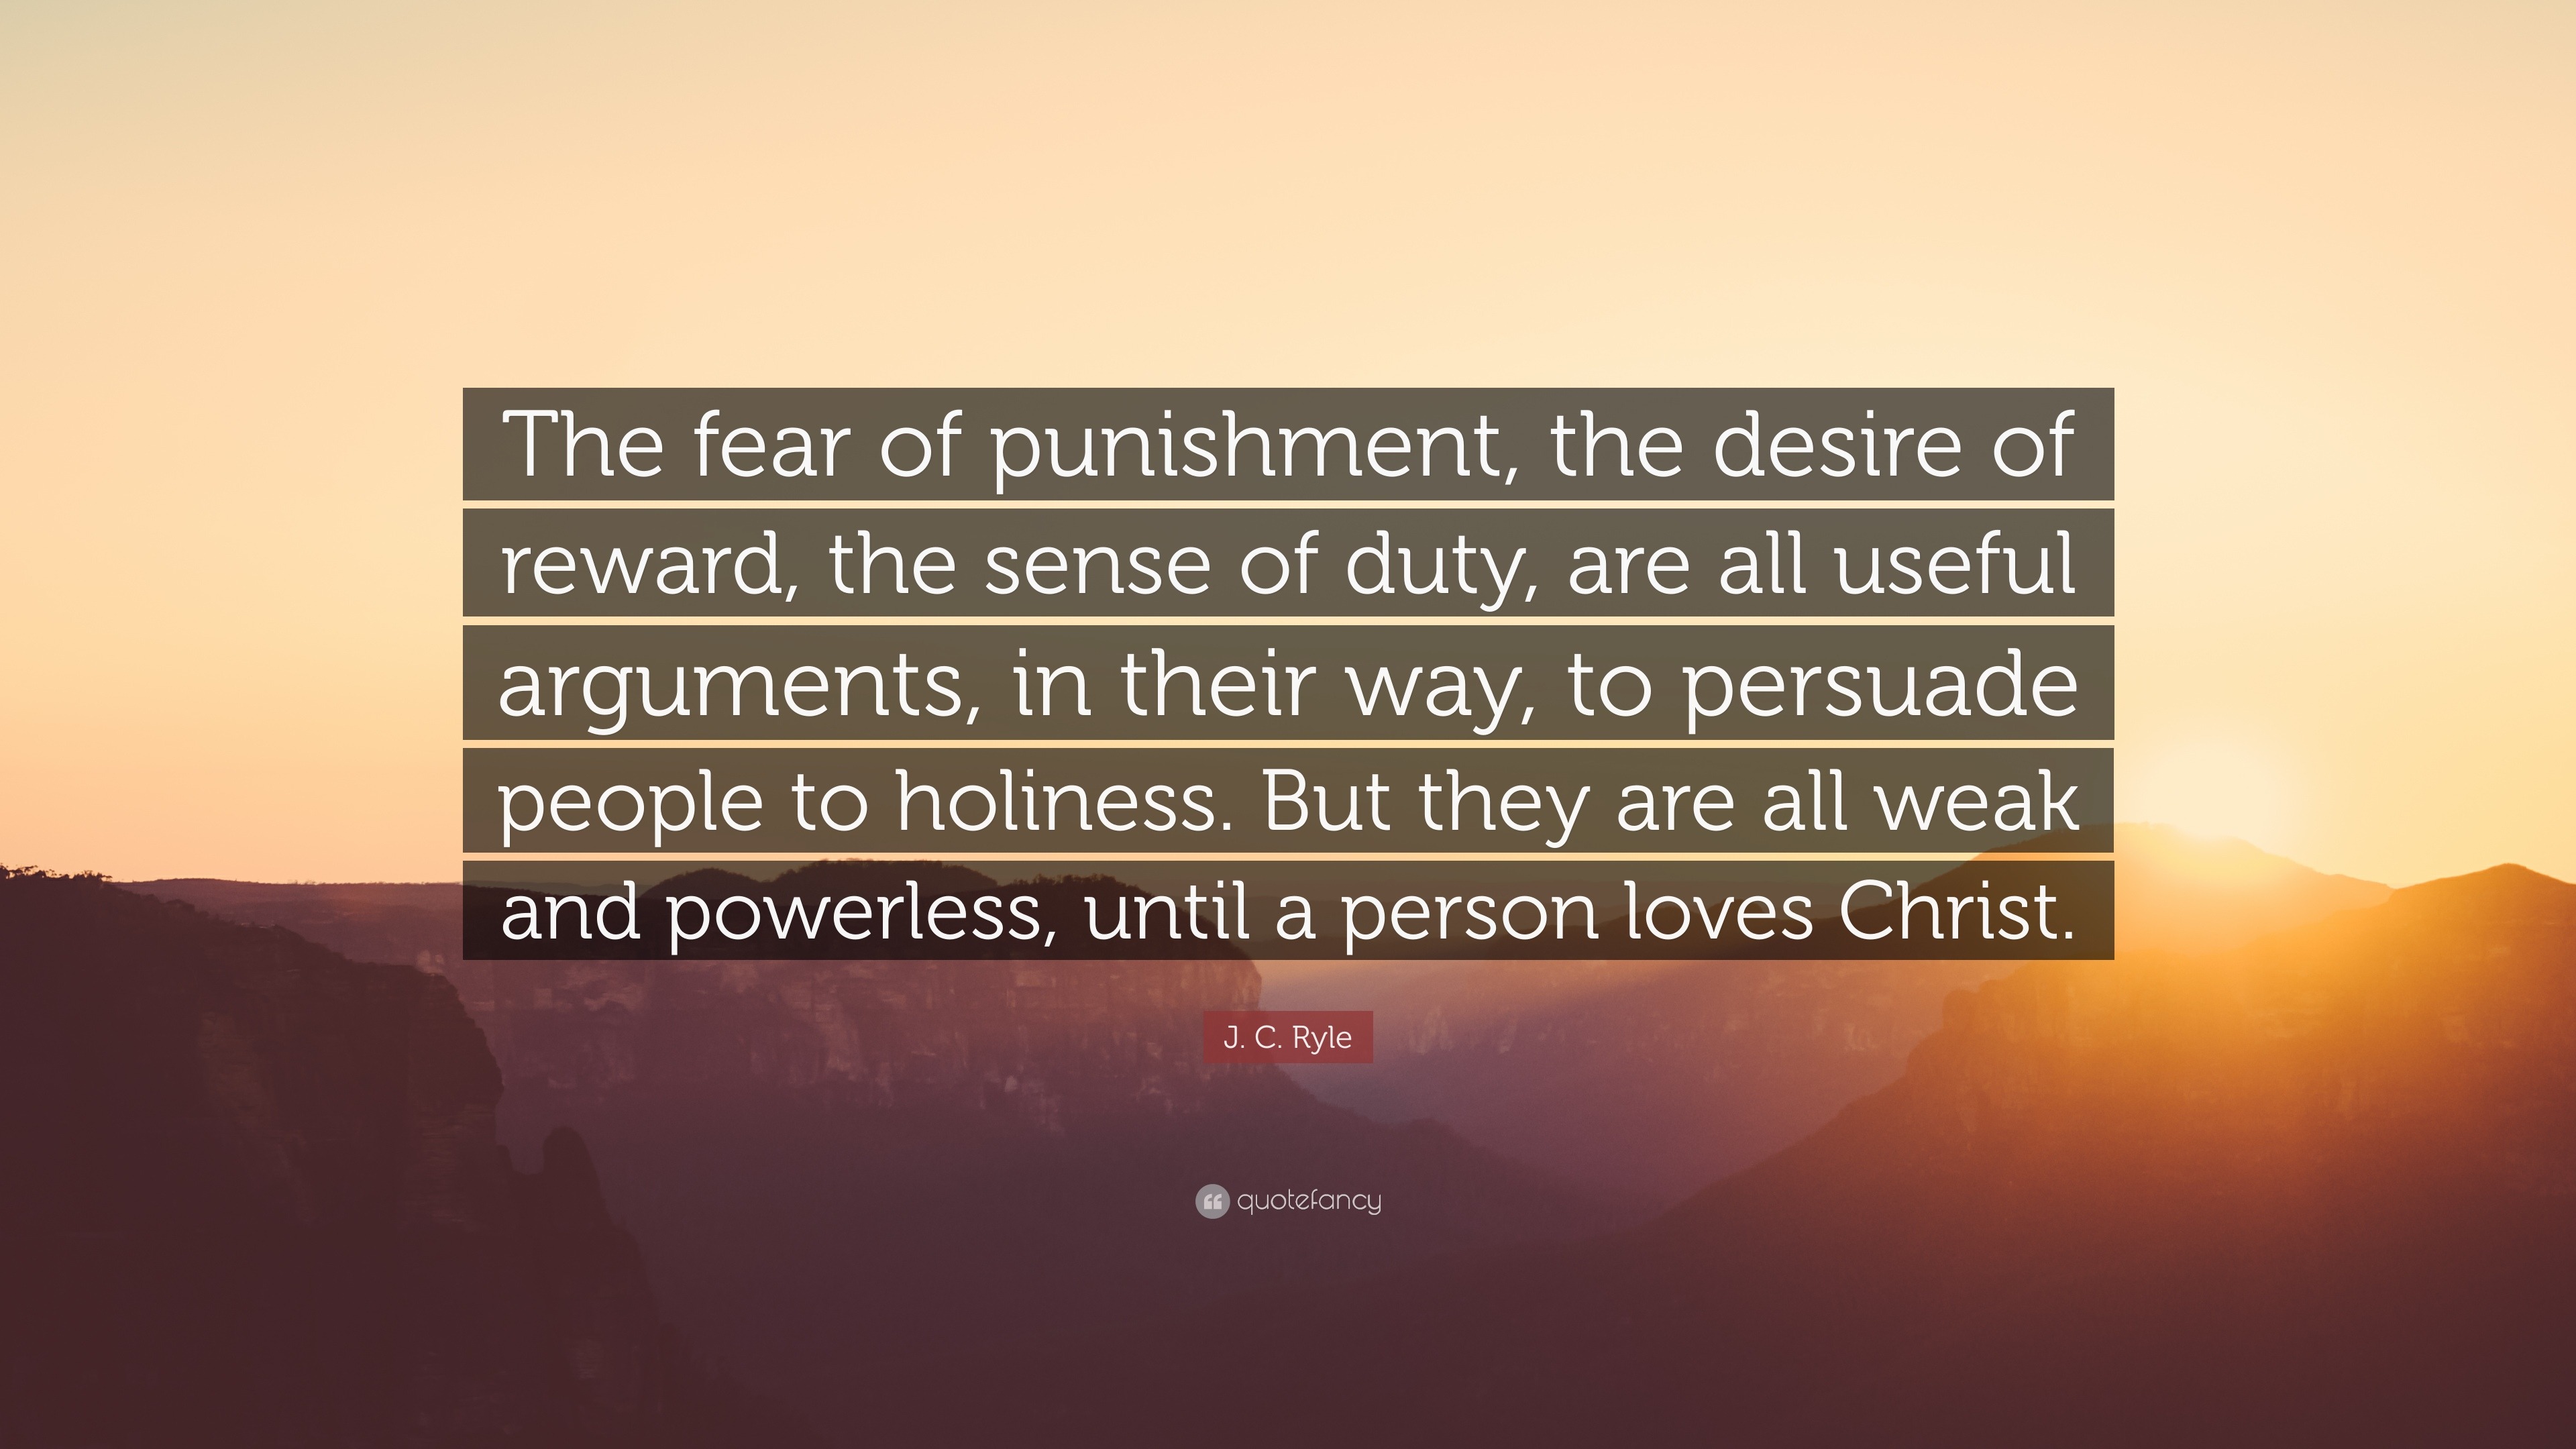 J C Ryle Quote The Fear Of Punishment The Desire Of Reward The Sense Of Duty Are All Useful Arguments In Their Way To Persuade Peo